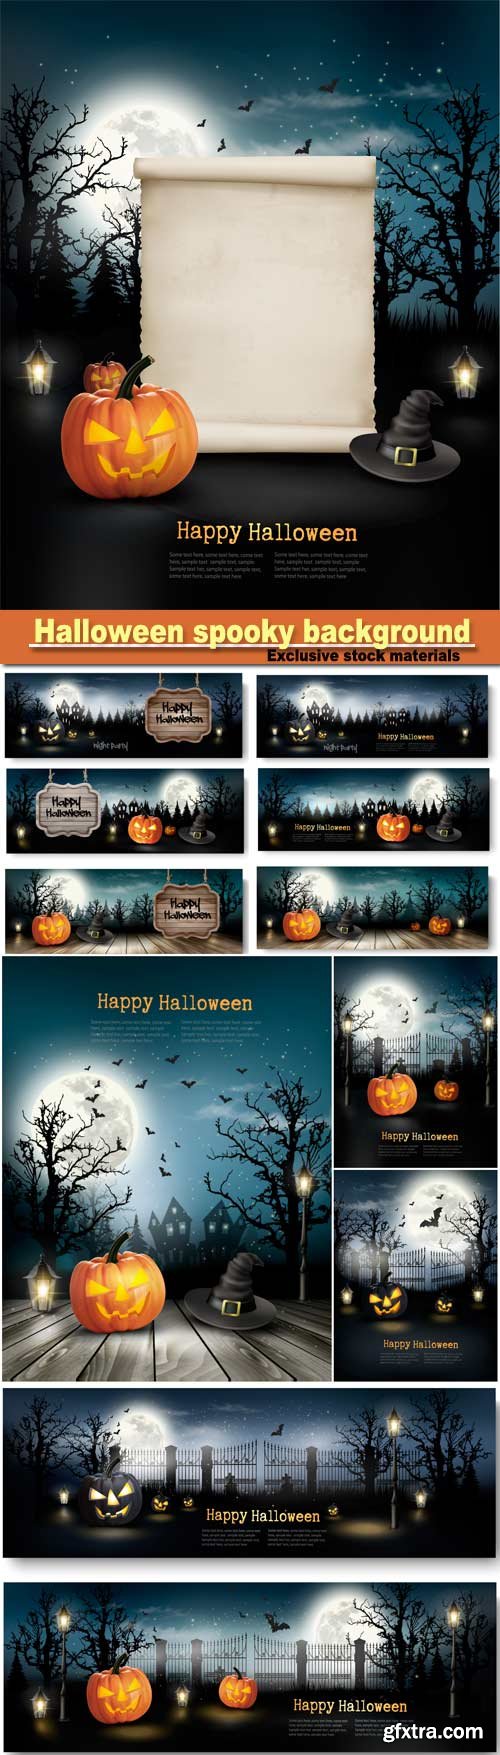 Halloween spooky background, holiday halloween banners with pumpkins